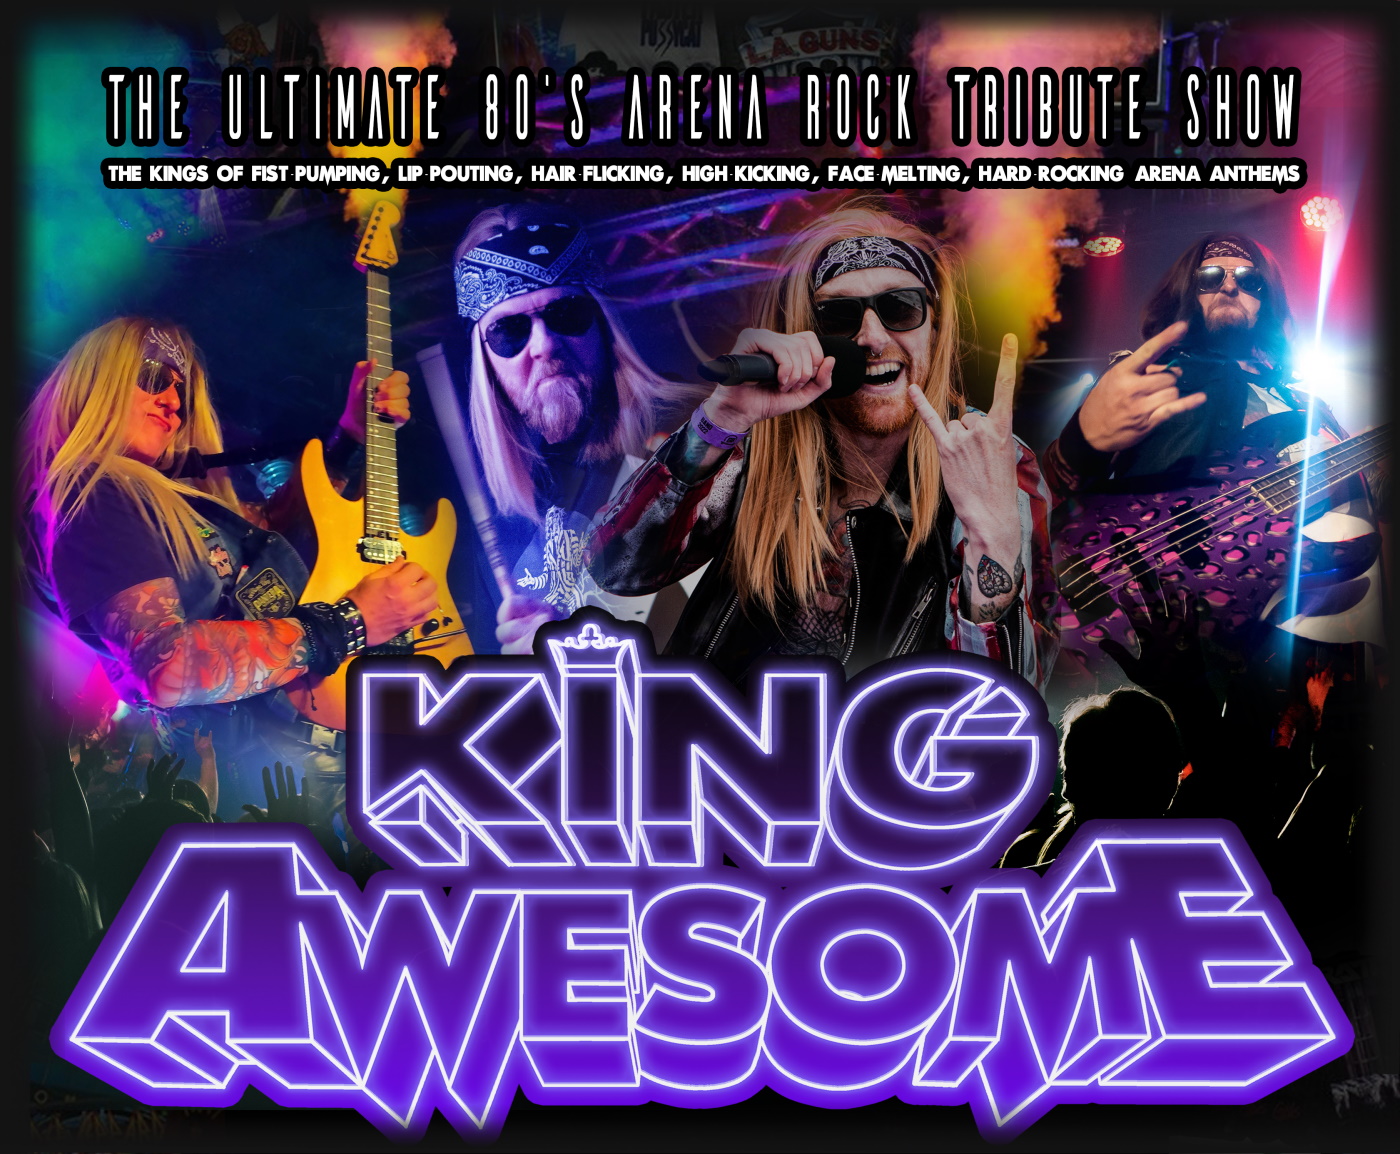 King Awesome - The kings of fist pumping, lip pouting, hair flicking, high kicking, face melting, hard rocking arena anthems - King Awesome. The very best 80s rock covers and tribute band in the UK